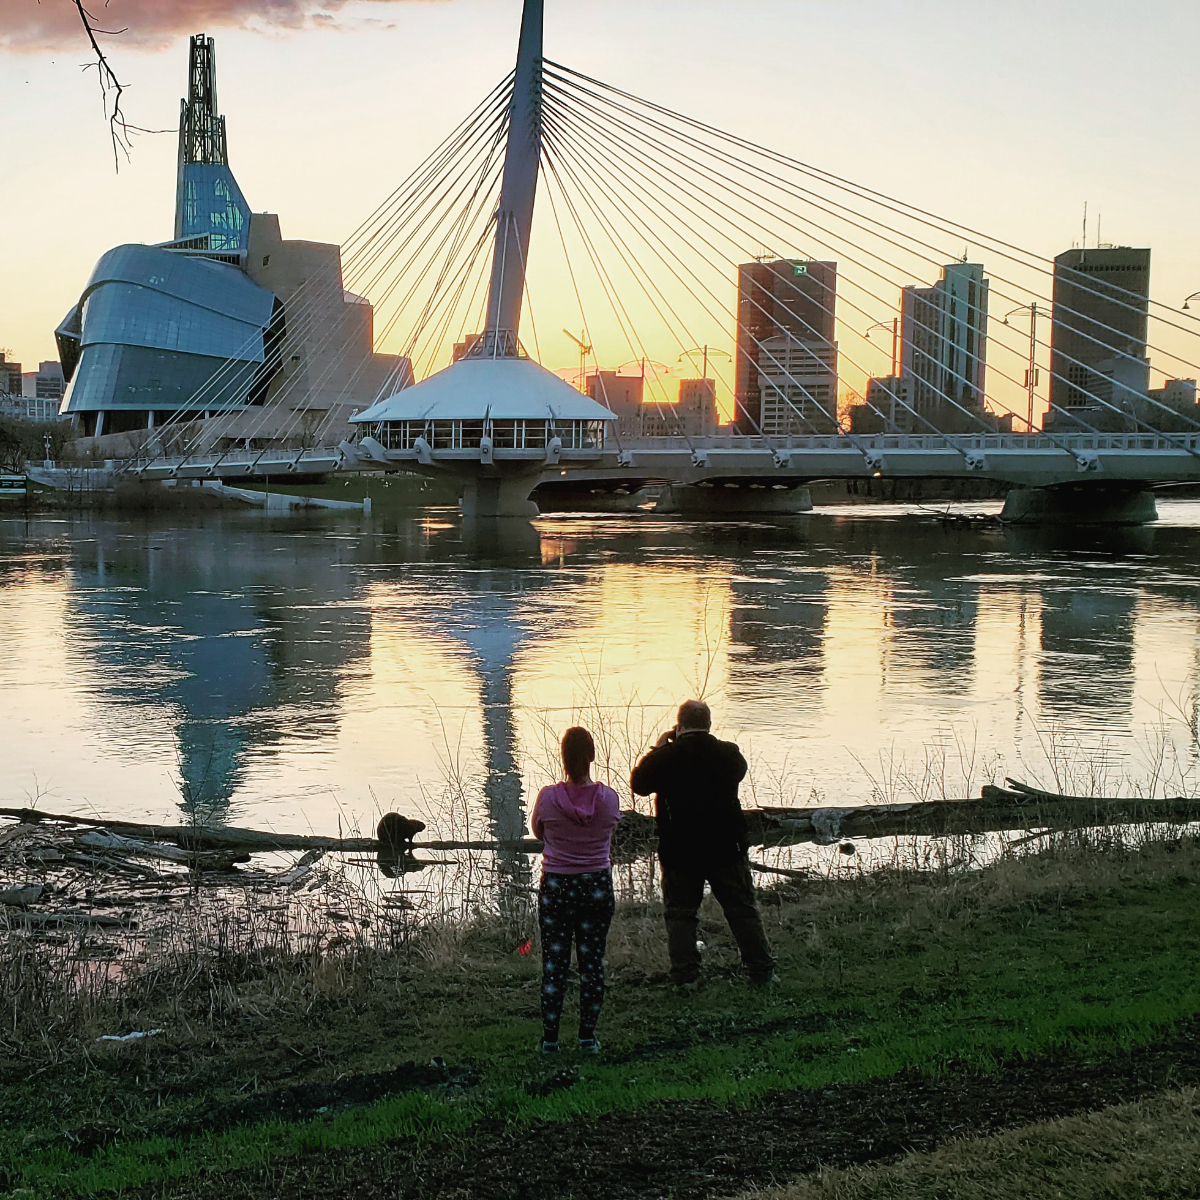 a background of the sun setting behind a Winnipeg skyline featuring the Canadian Museum of Human Rights (a funky looking huge building), the Esplanade Riel (a bridge with a tall spike and suspension cables coming from it), and the tall towers of Portage and Main. The foreground is the Red River, where two people are standing on the banks taking a photo of a beaver who is sitting on a log.